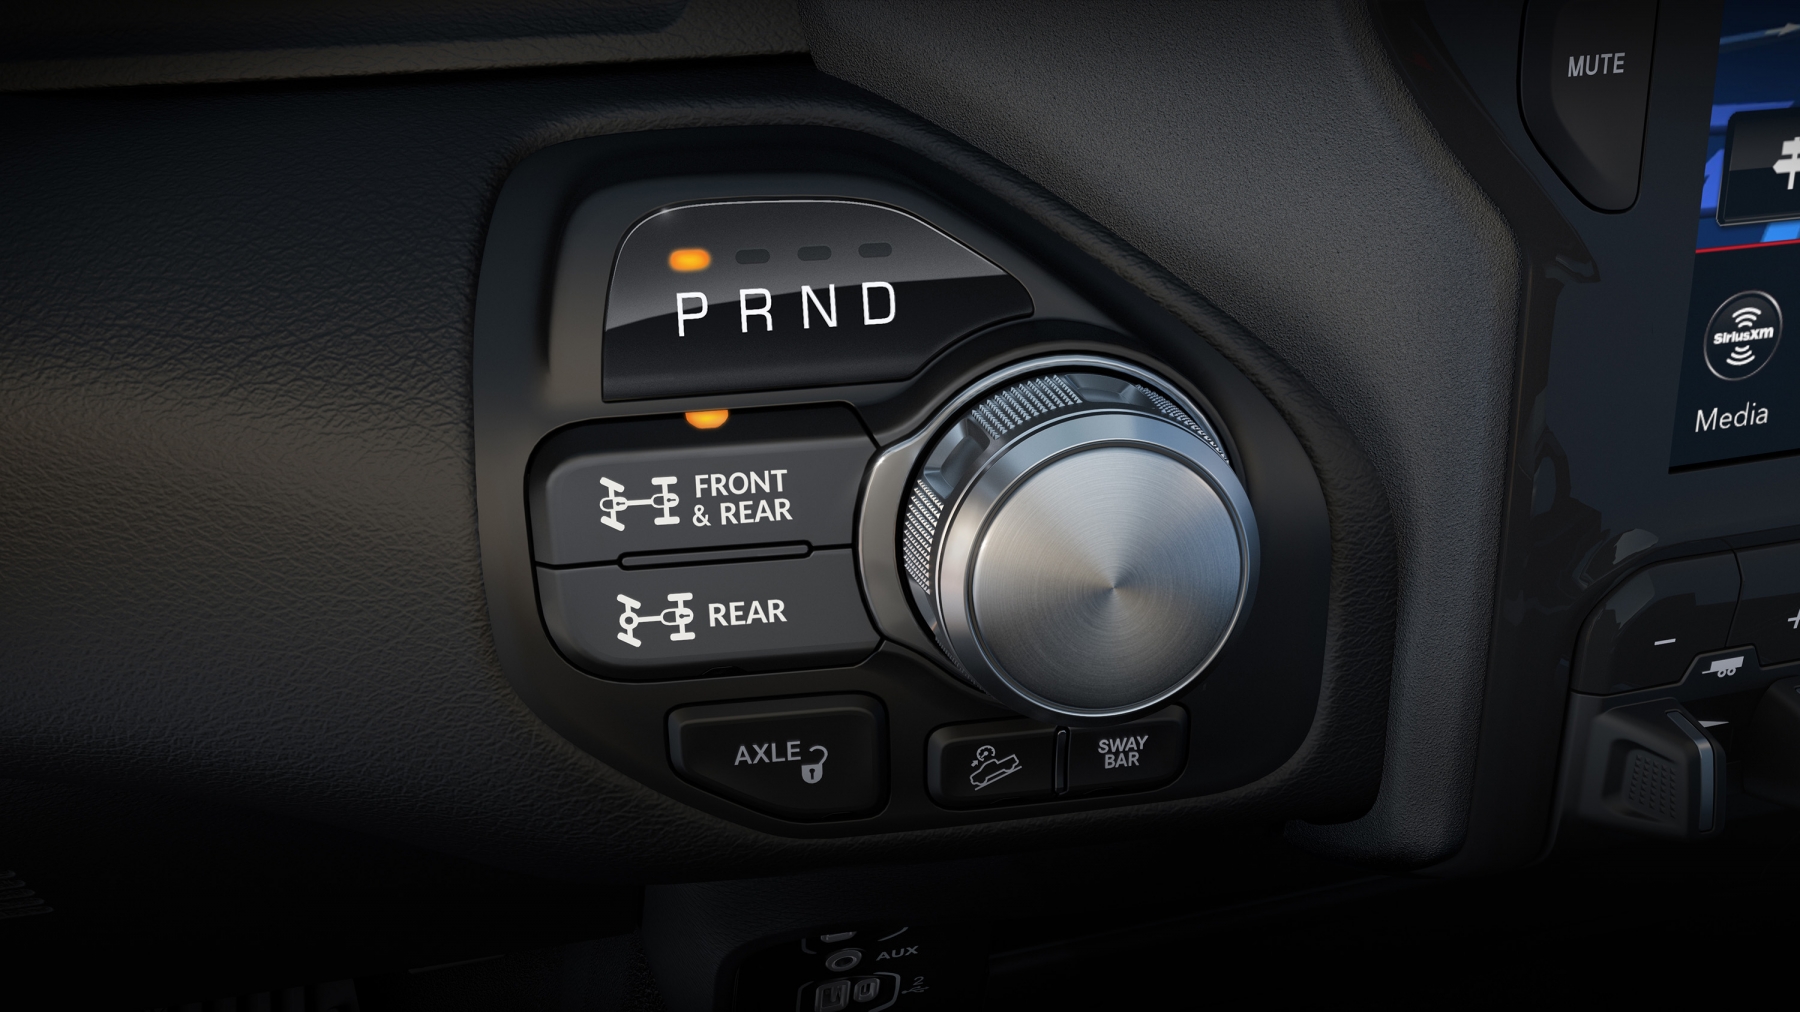 2019 Ram Power Wagon – Eight-speed rotary shifter with controls for off-road components (RAM_